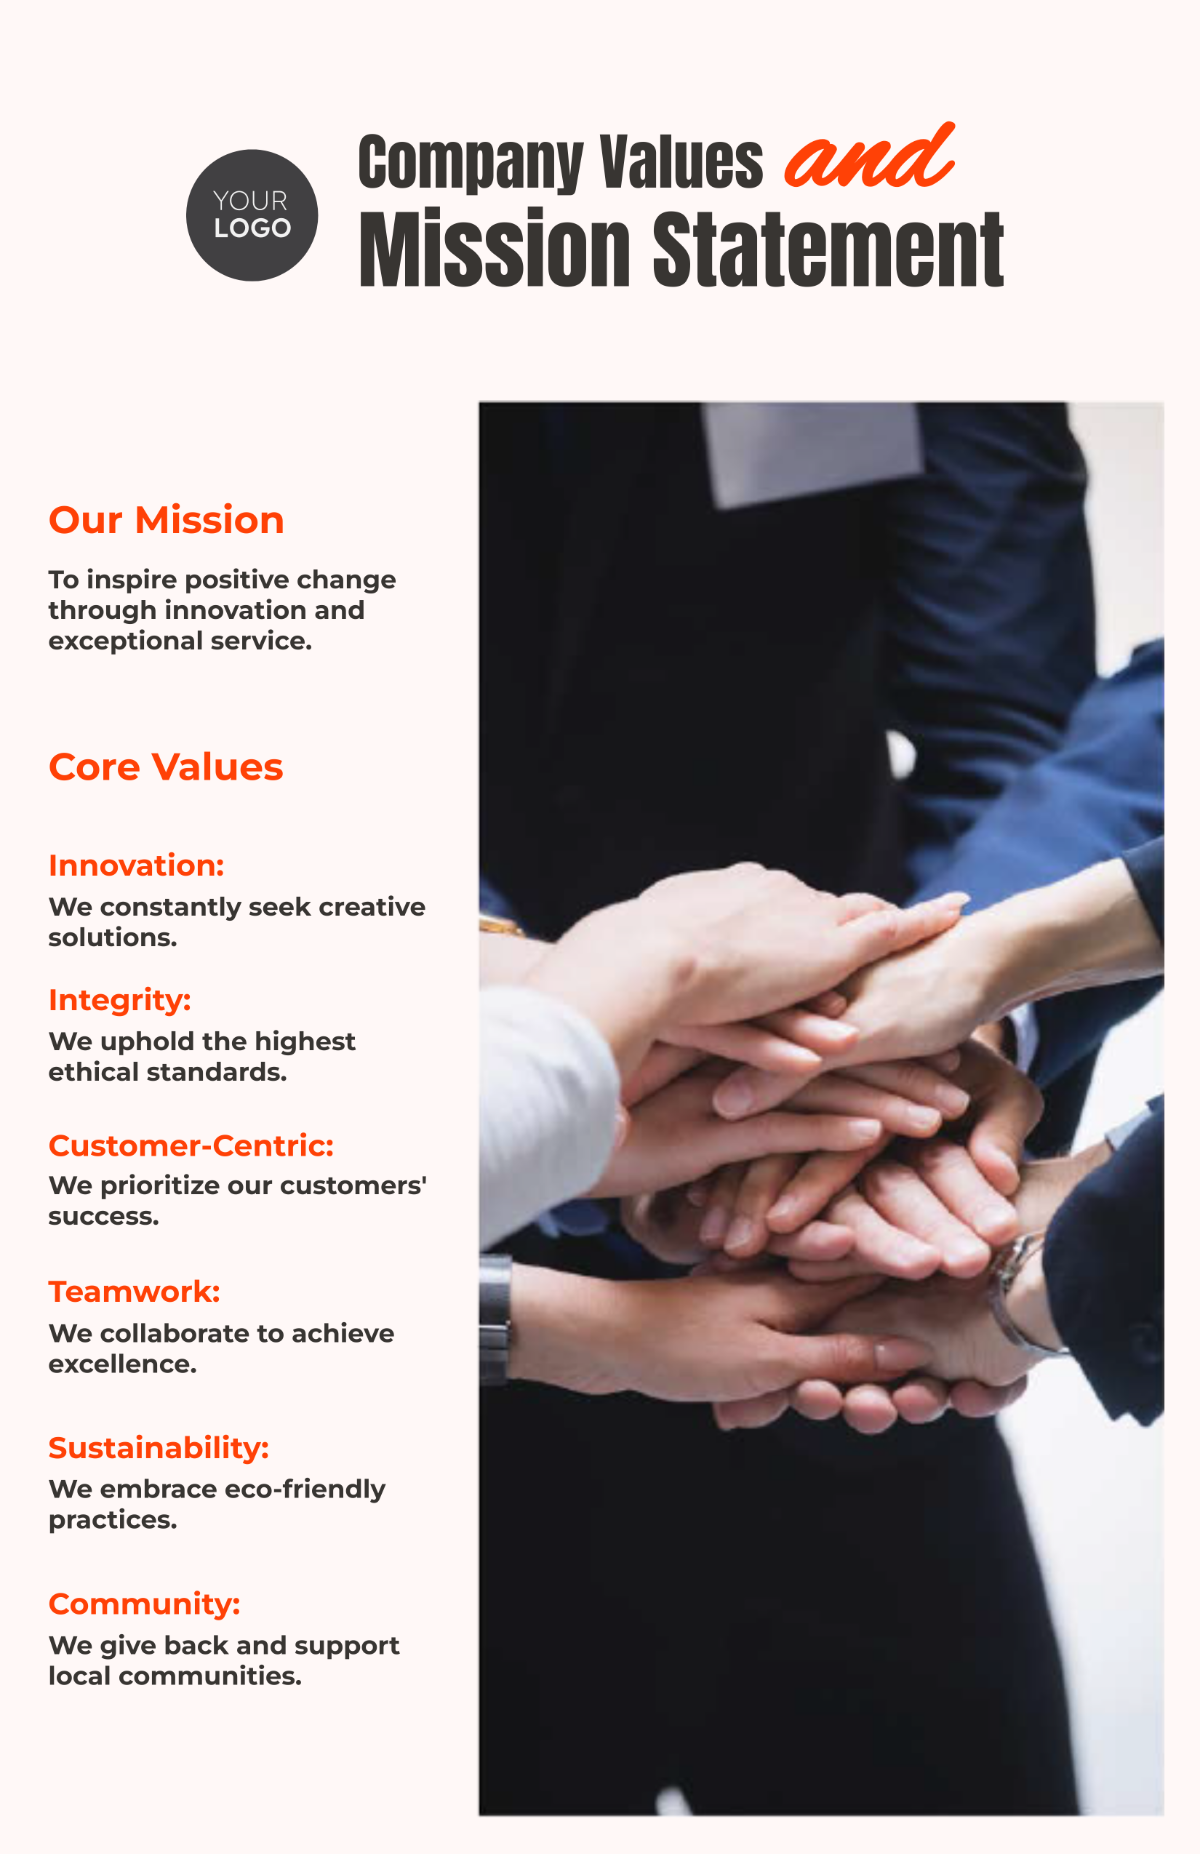 Company Values and Mission Statement Poster HR Template